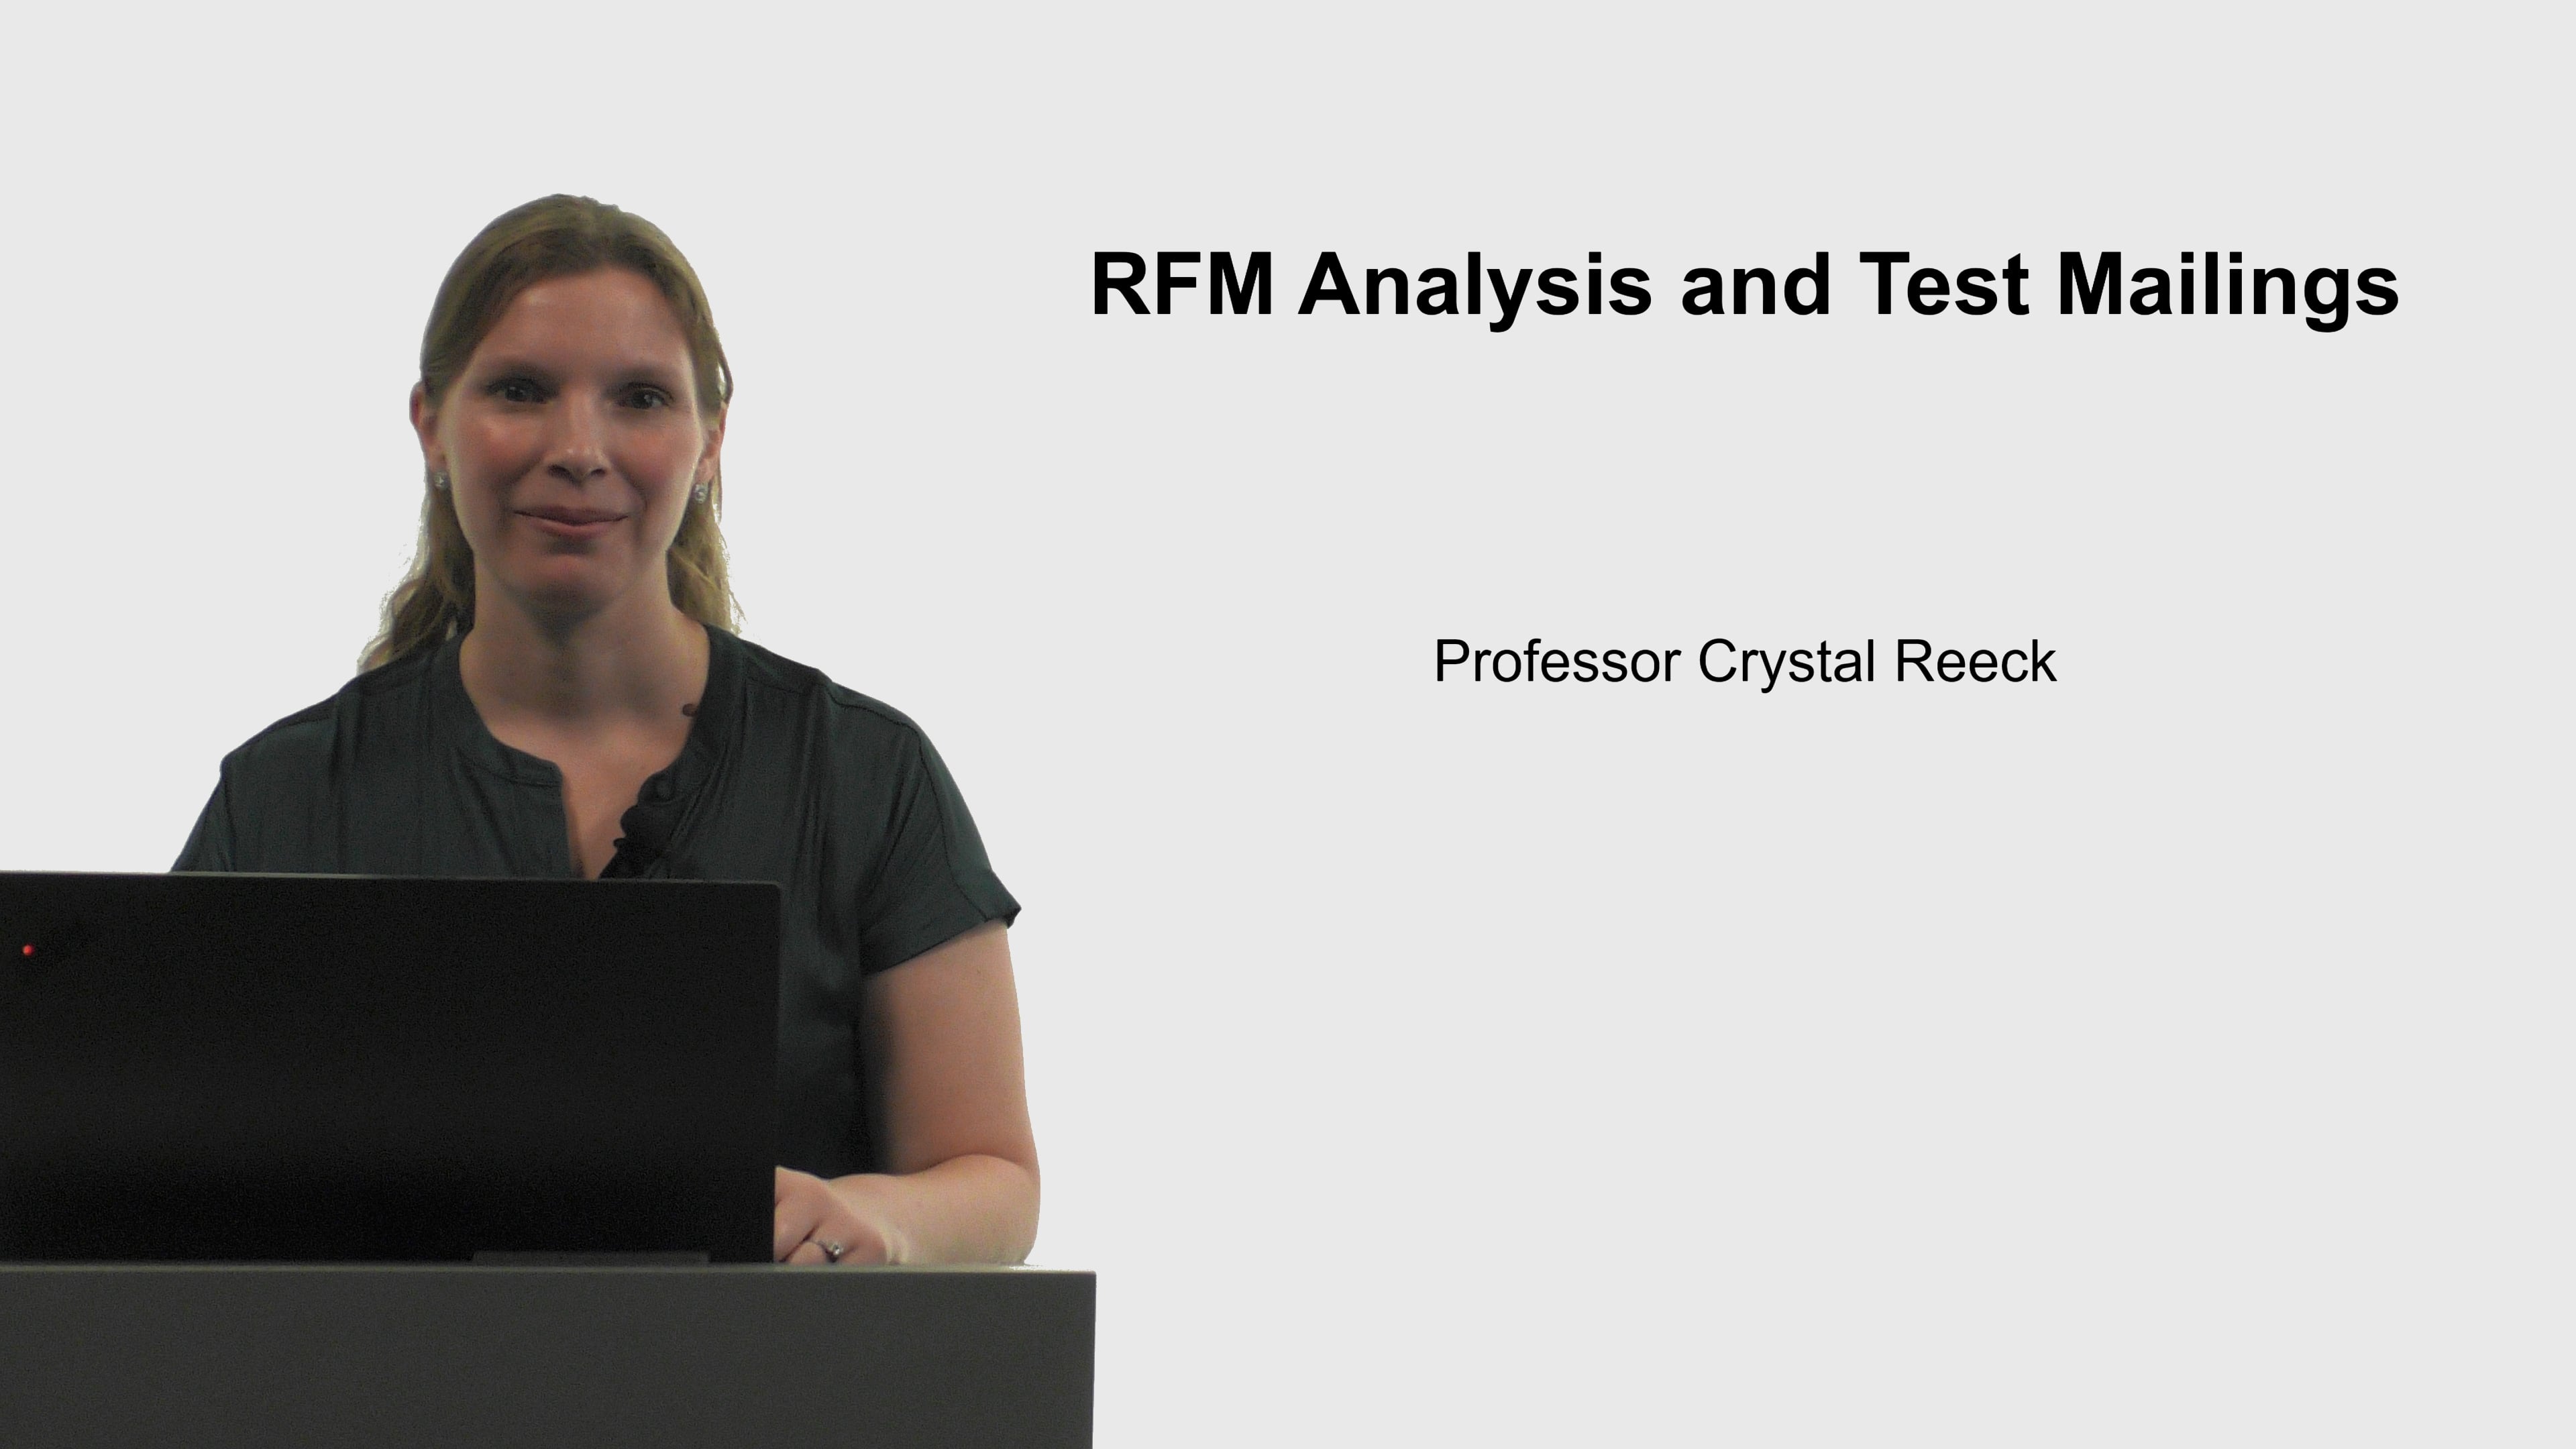 RFM Analysis and Test Mailing